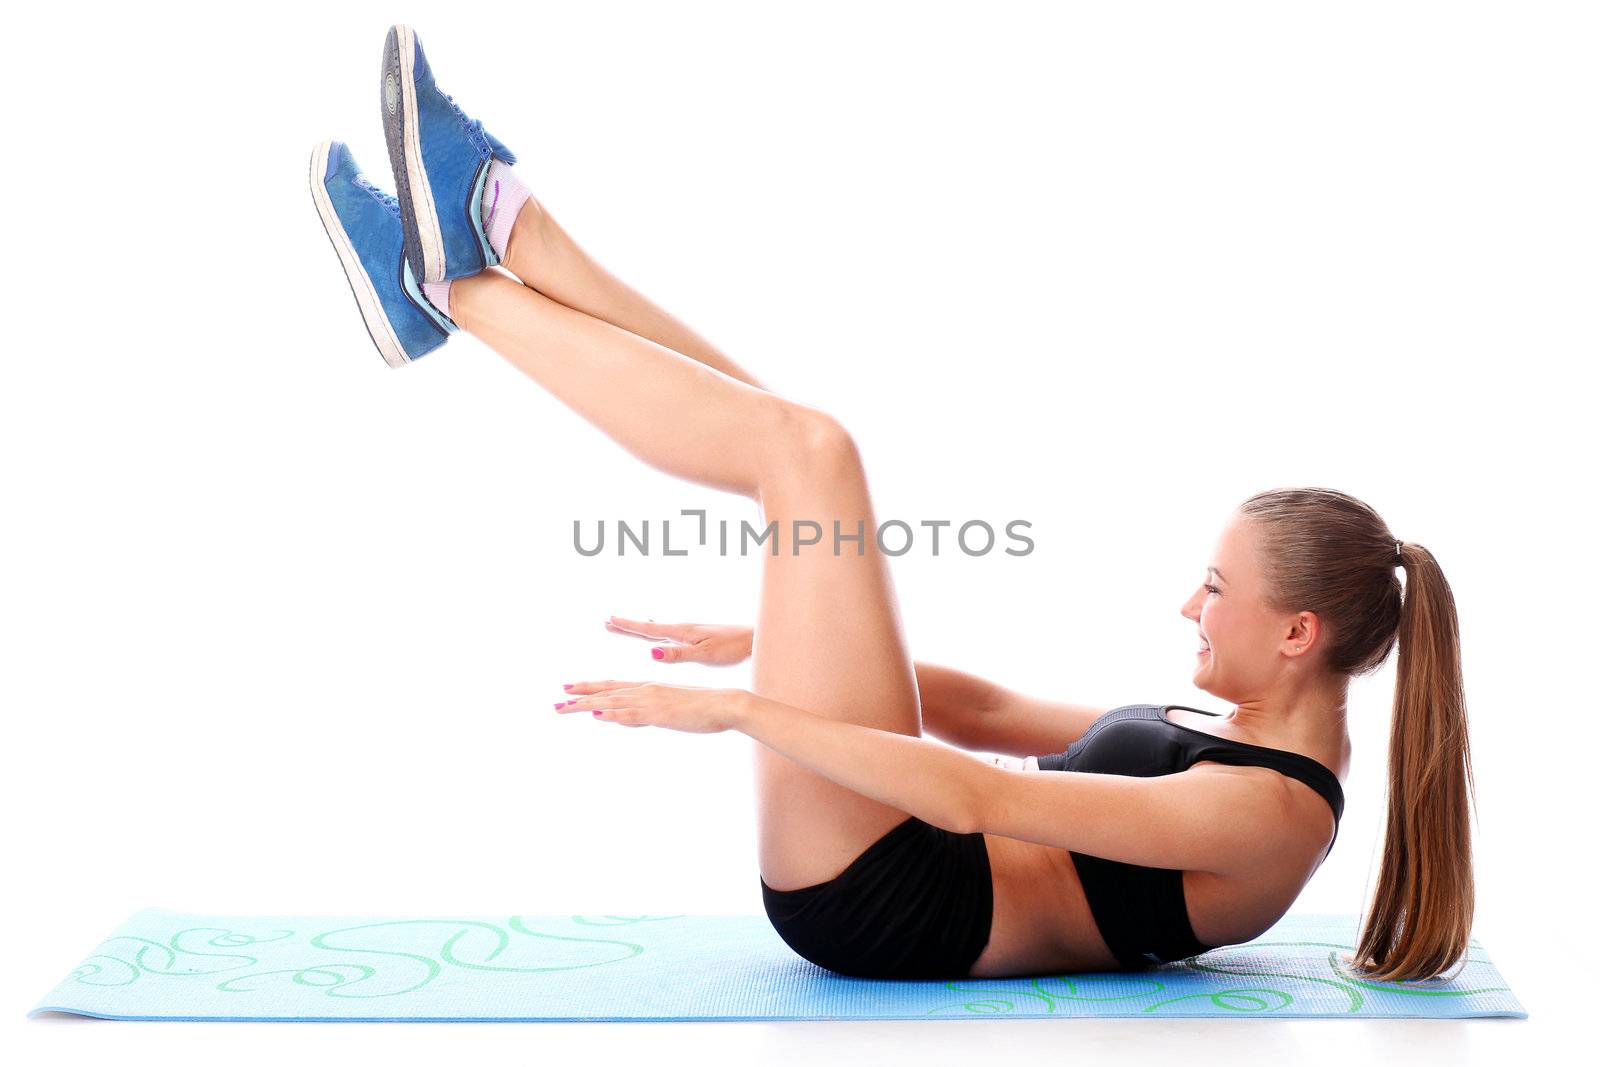 Happy girl doing fitness exercises on a mat over white background